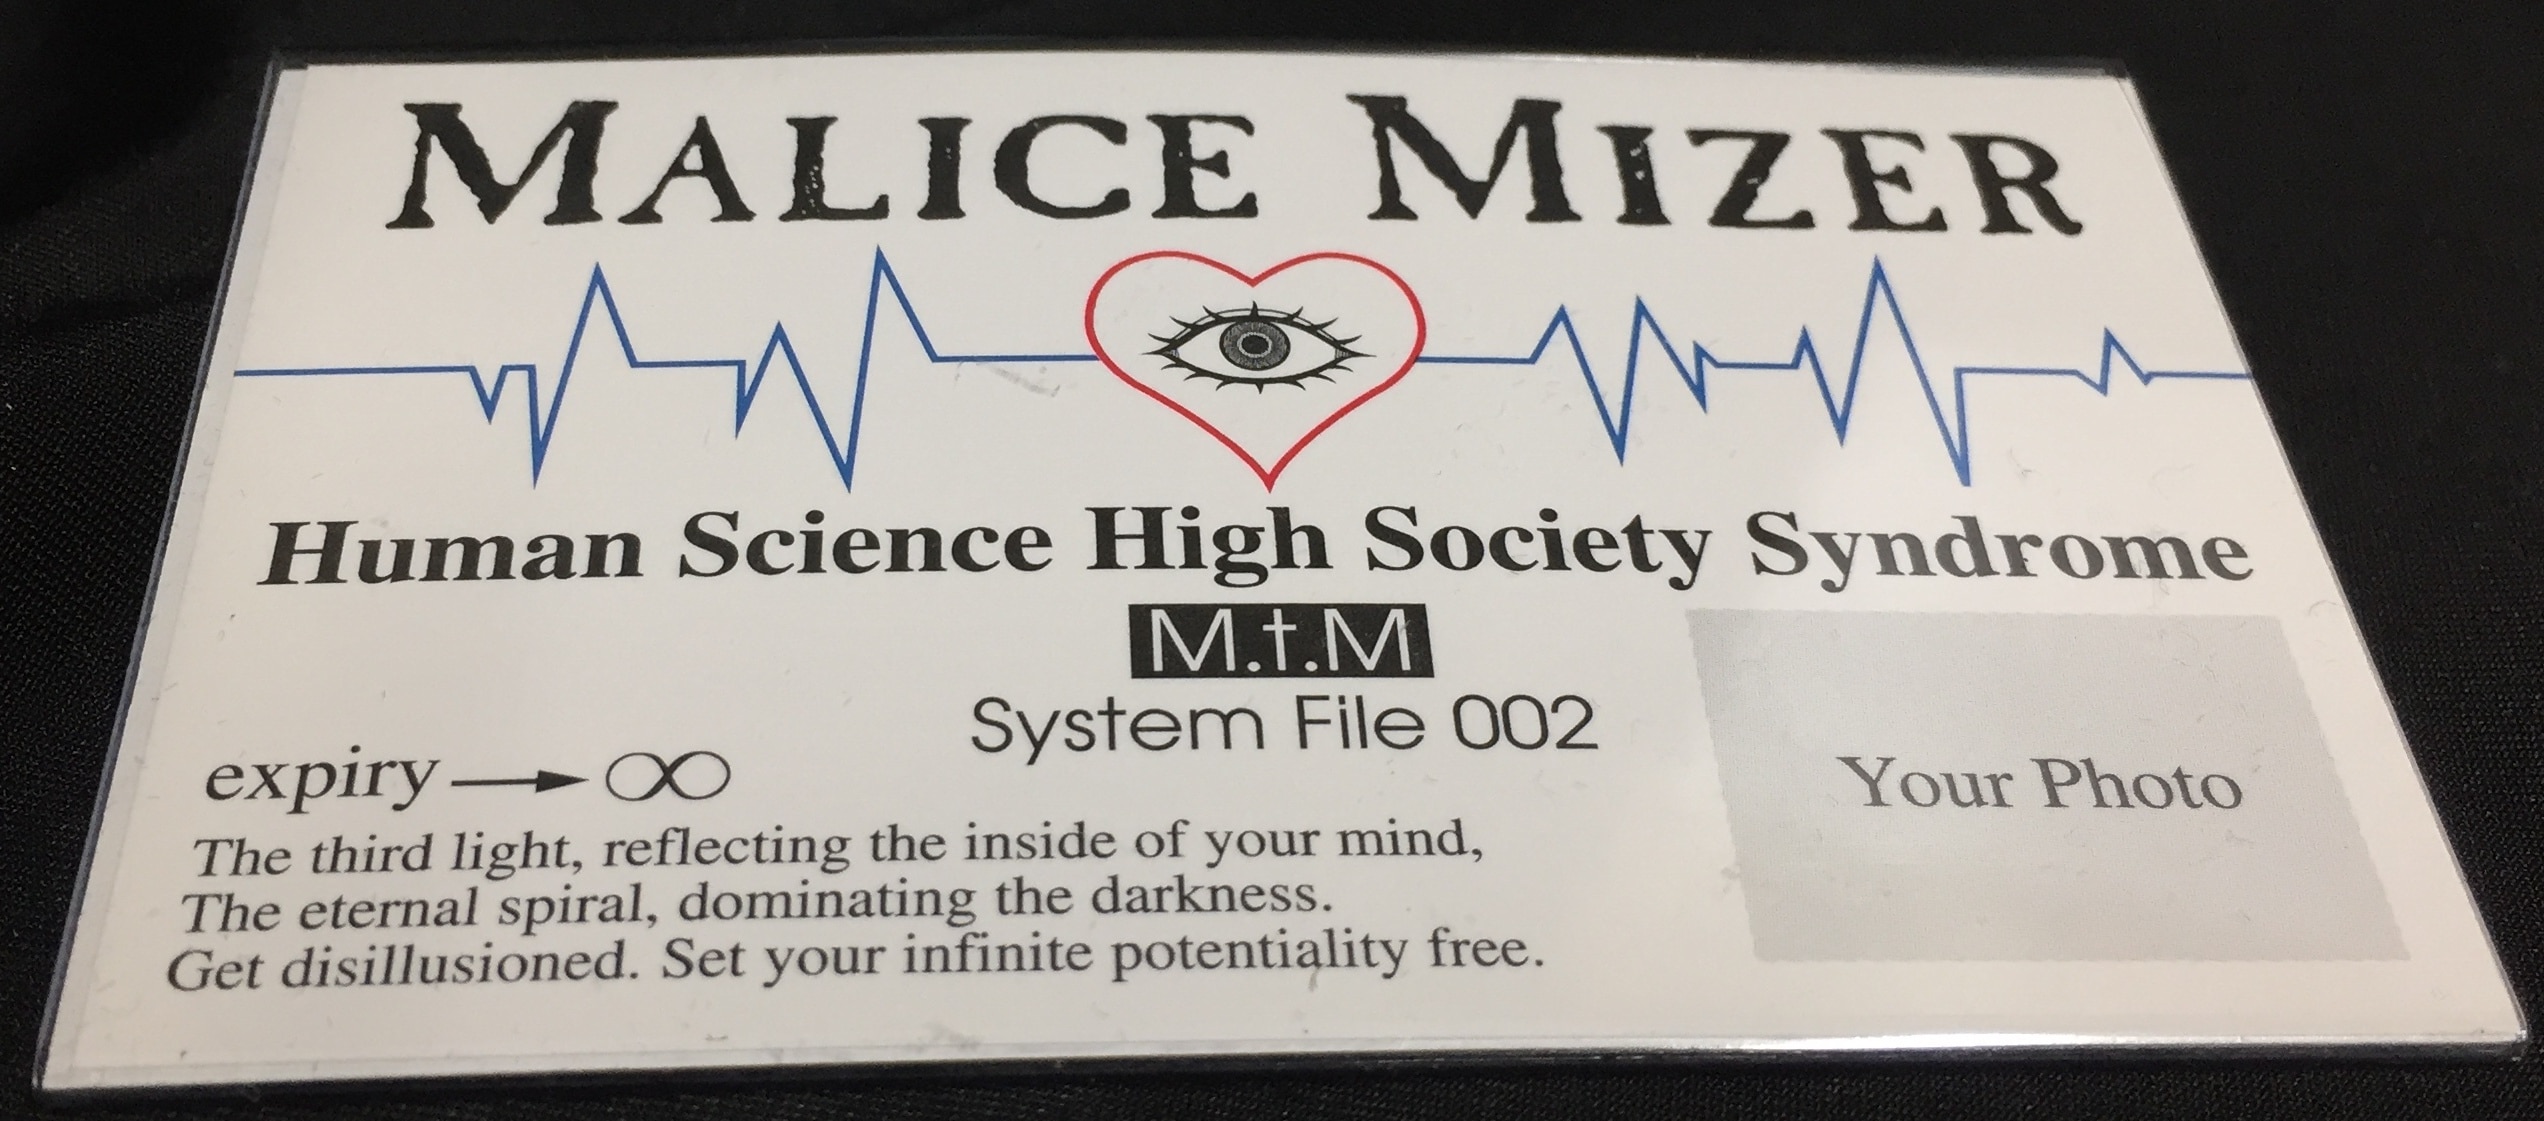 MALICE MIZER Human Science High Society Syndrome -M.†.M- System 